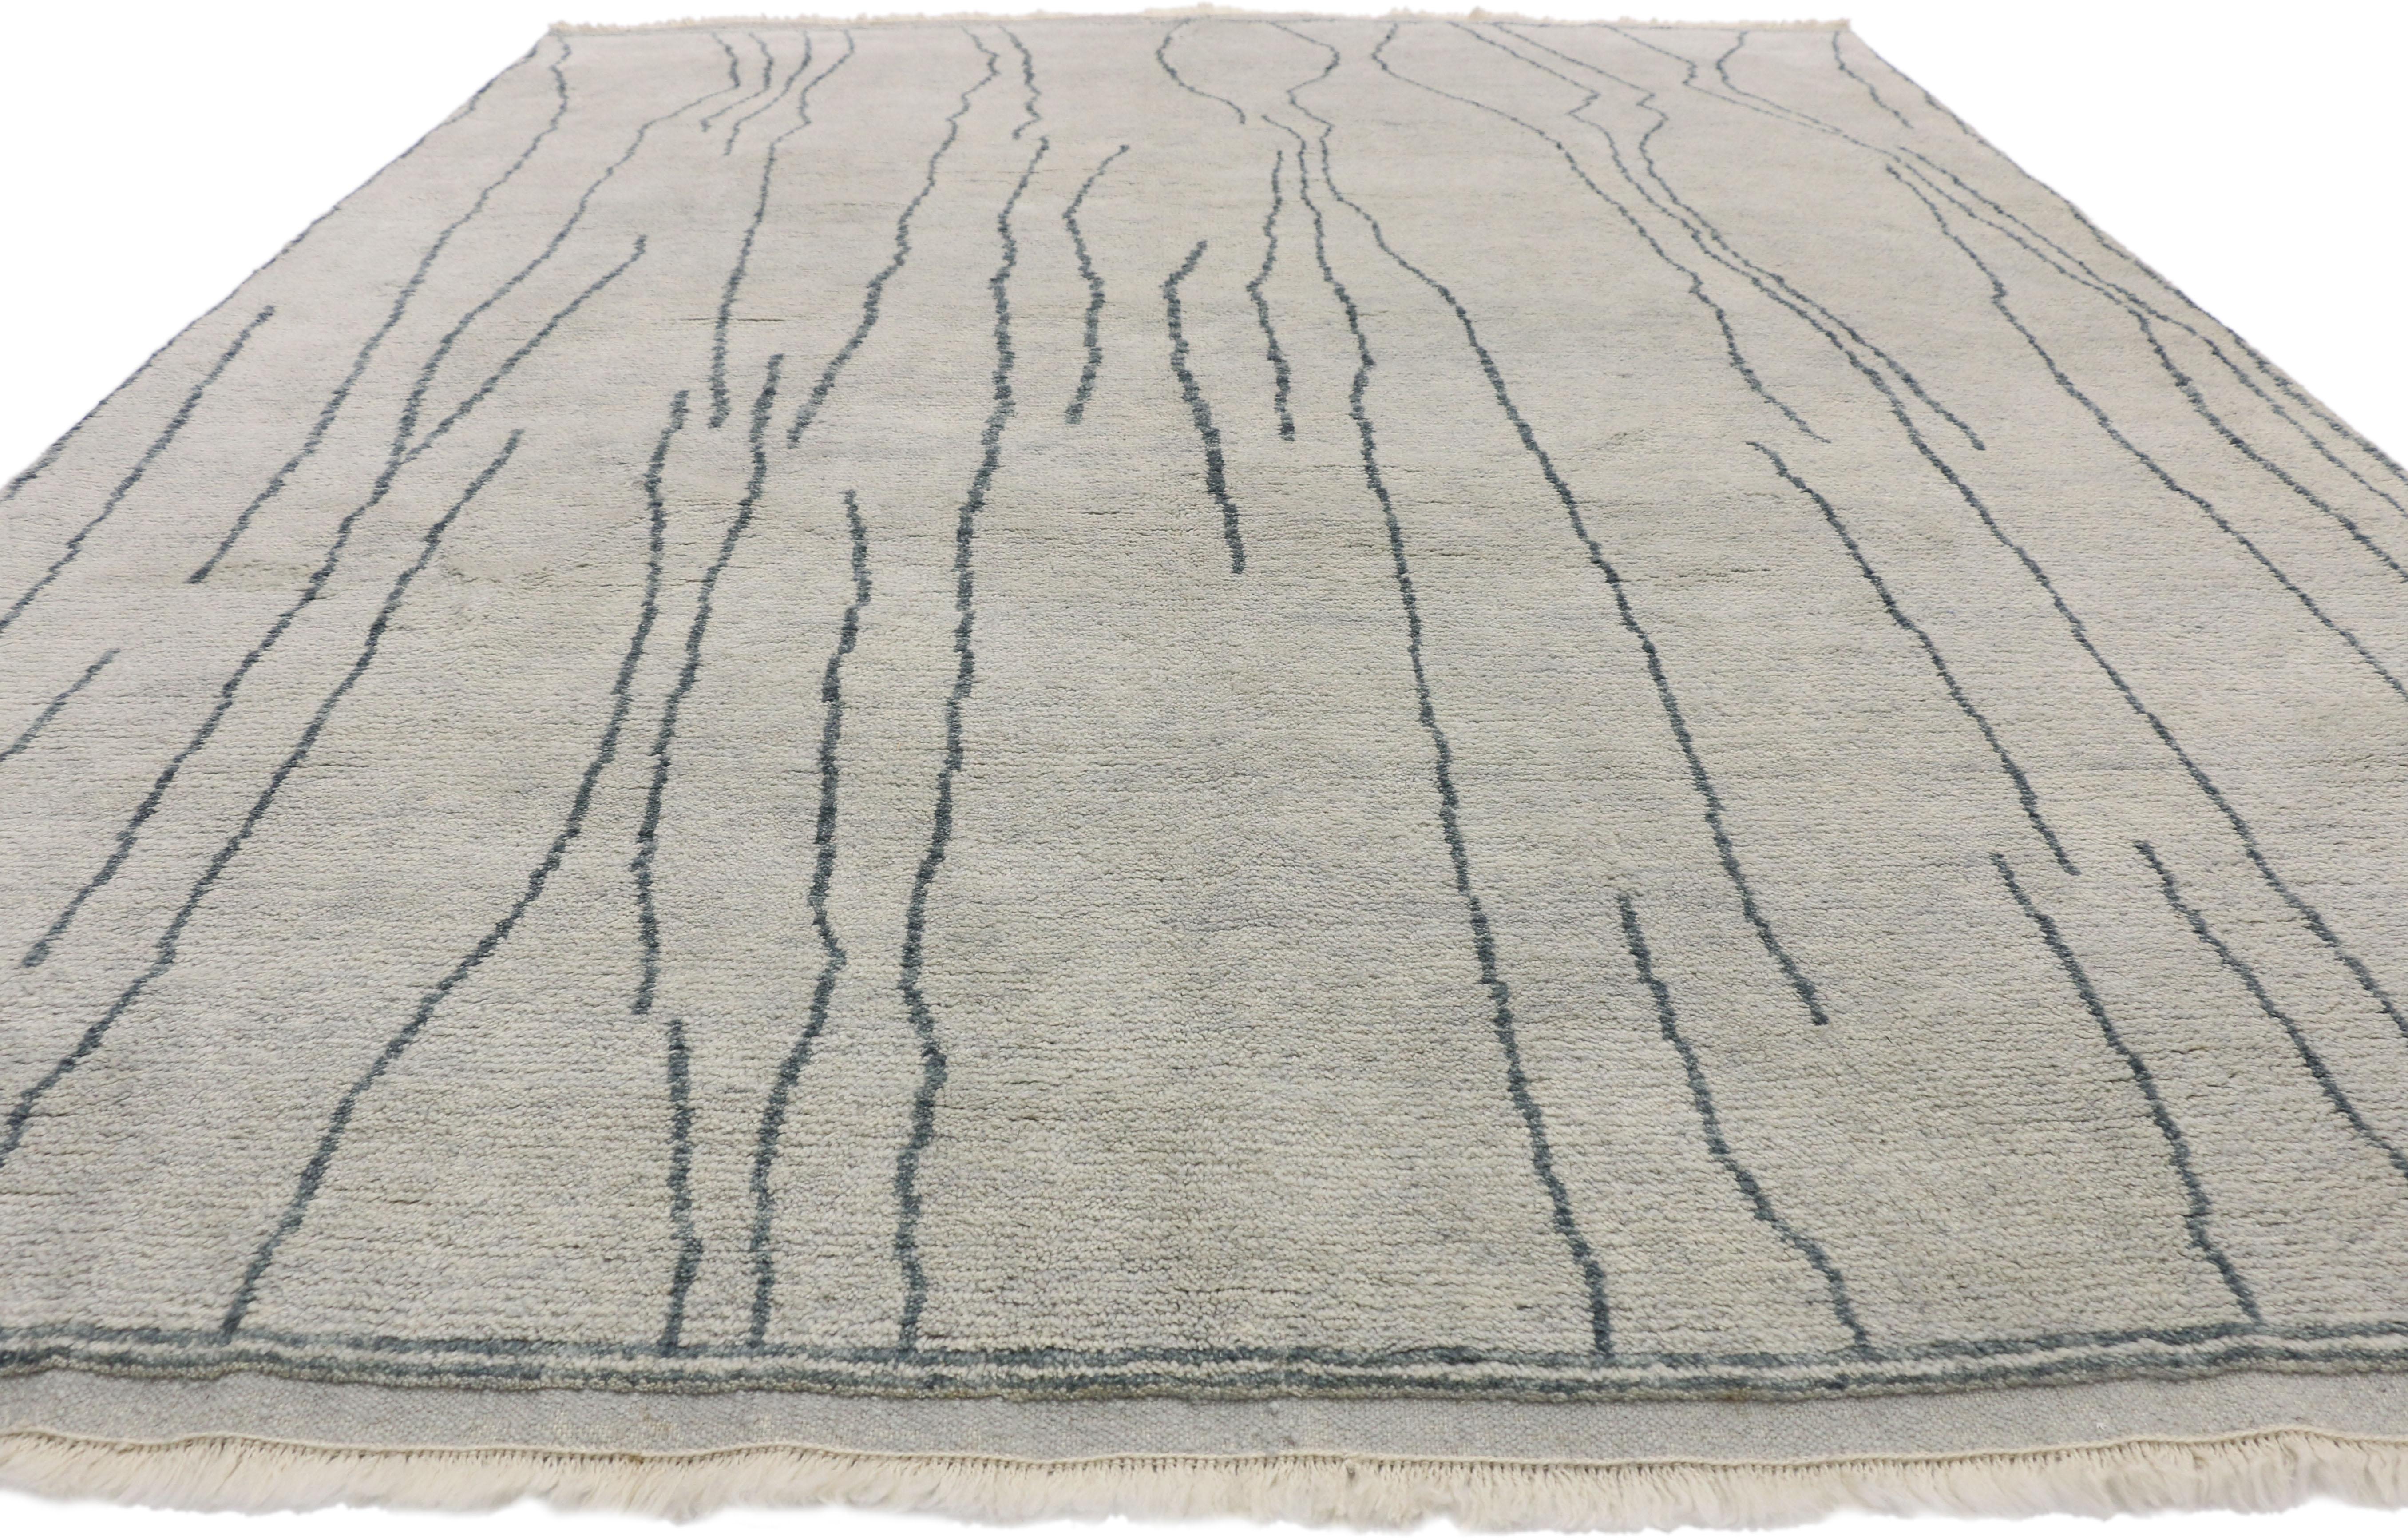 Expressionist New Contemporary Moroccan Area Rug with Linear Design